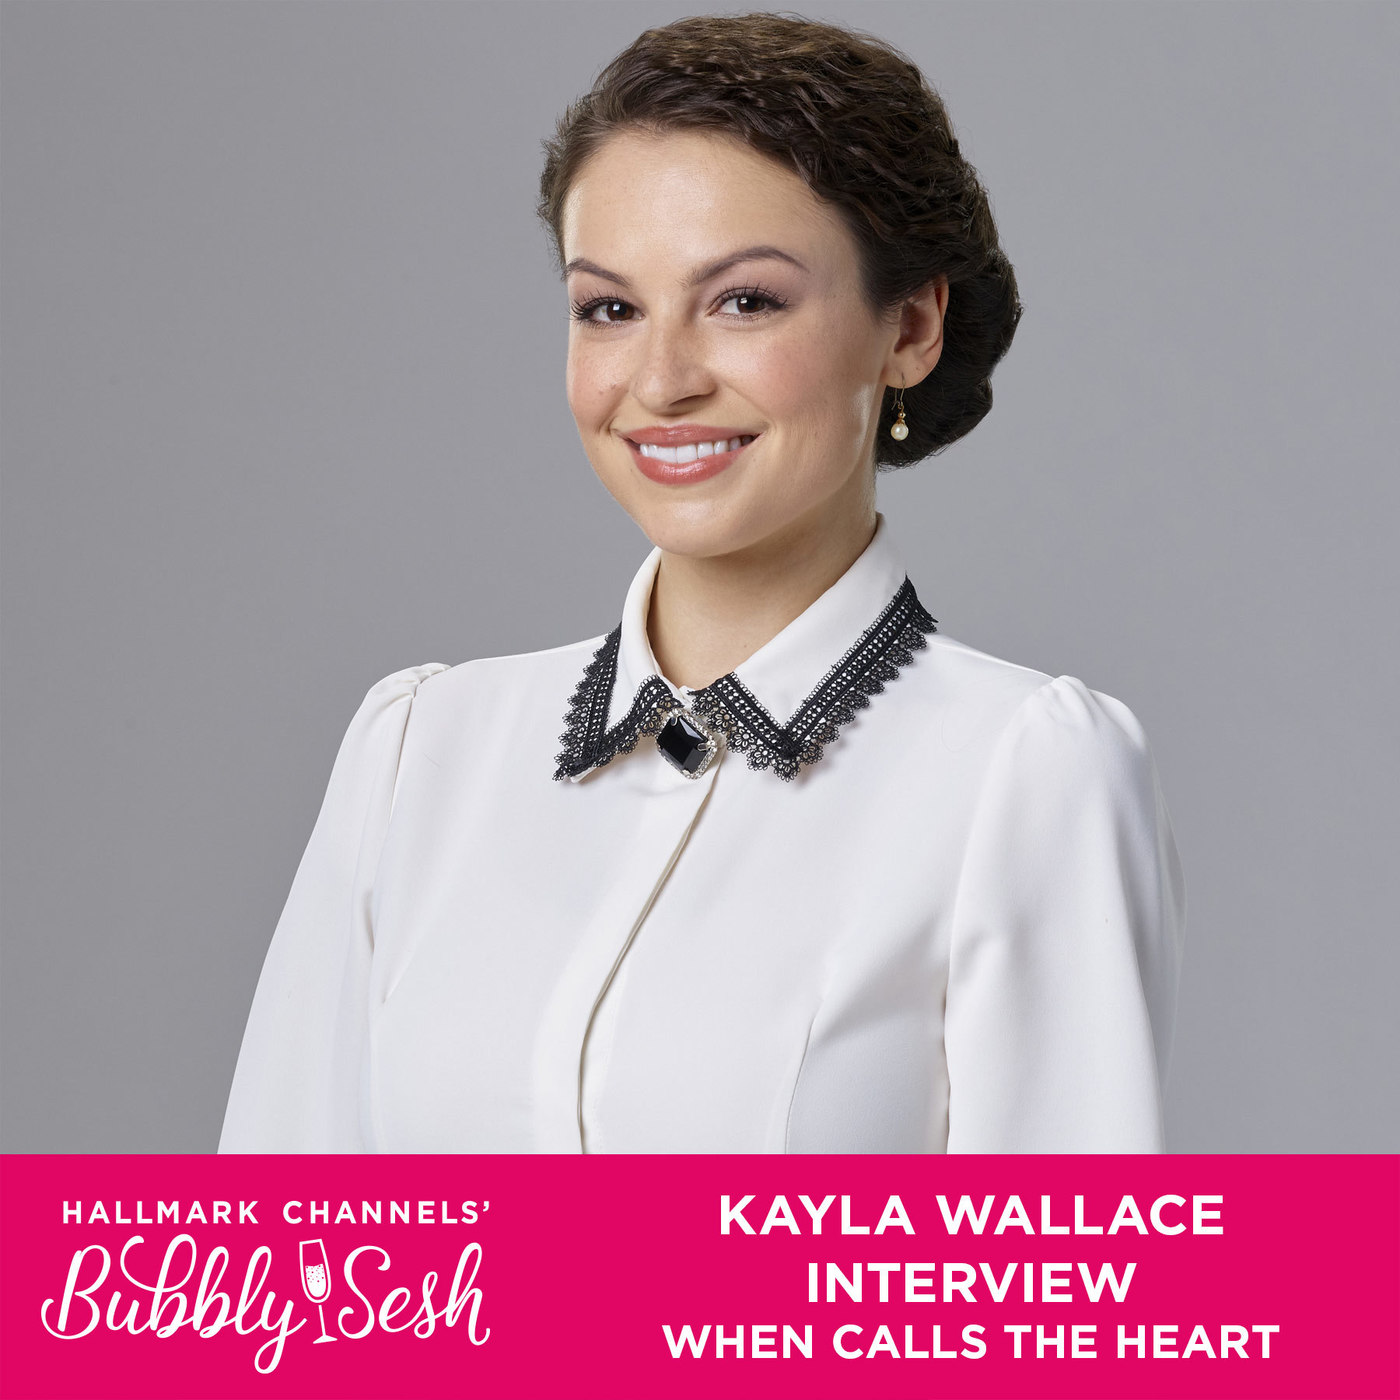 Kayla Wallace Interview, When Calls the Heart